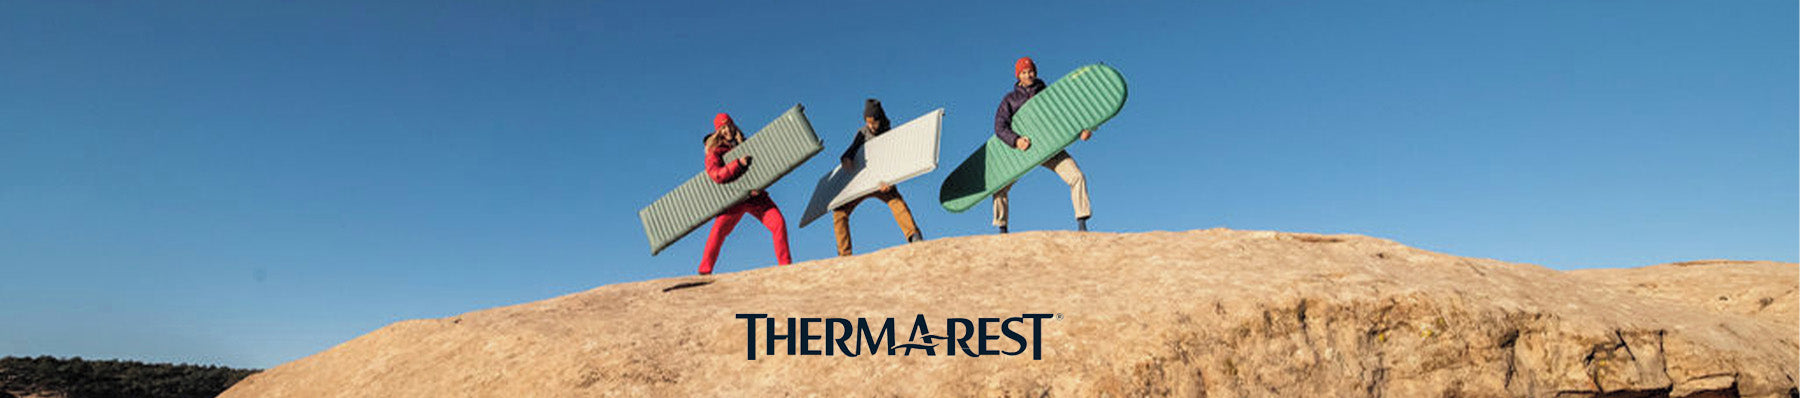 Thermarest Banner Collection Image